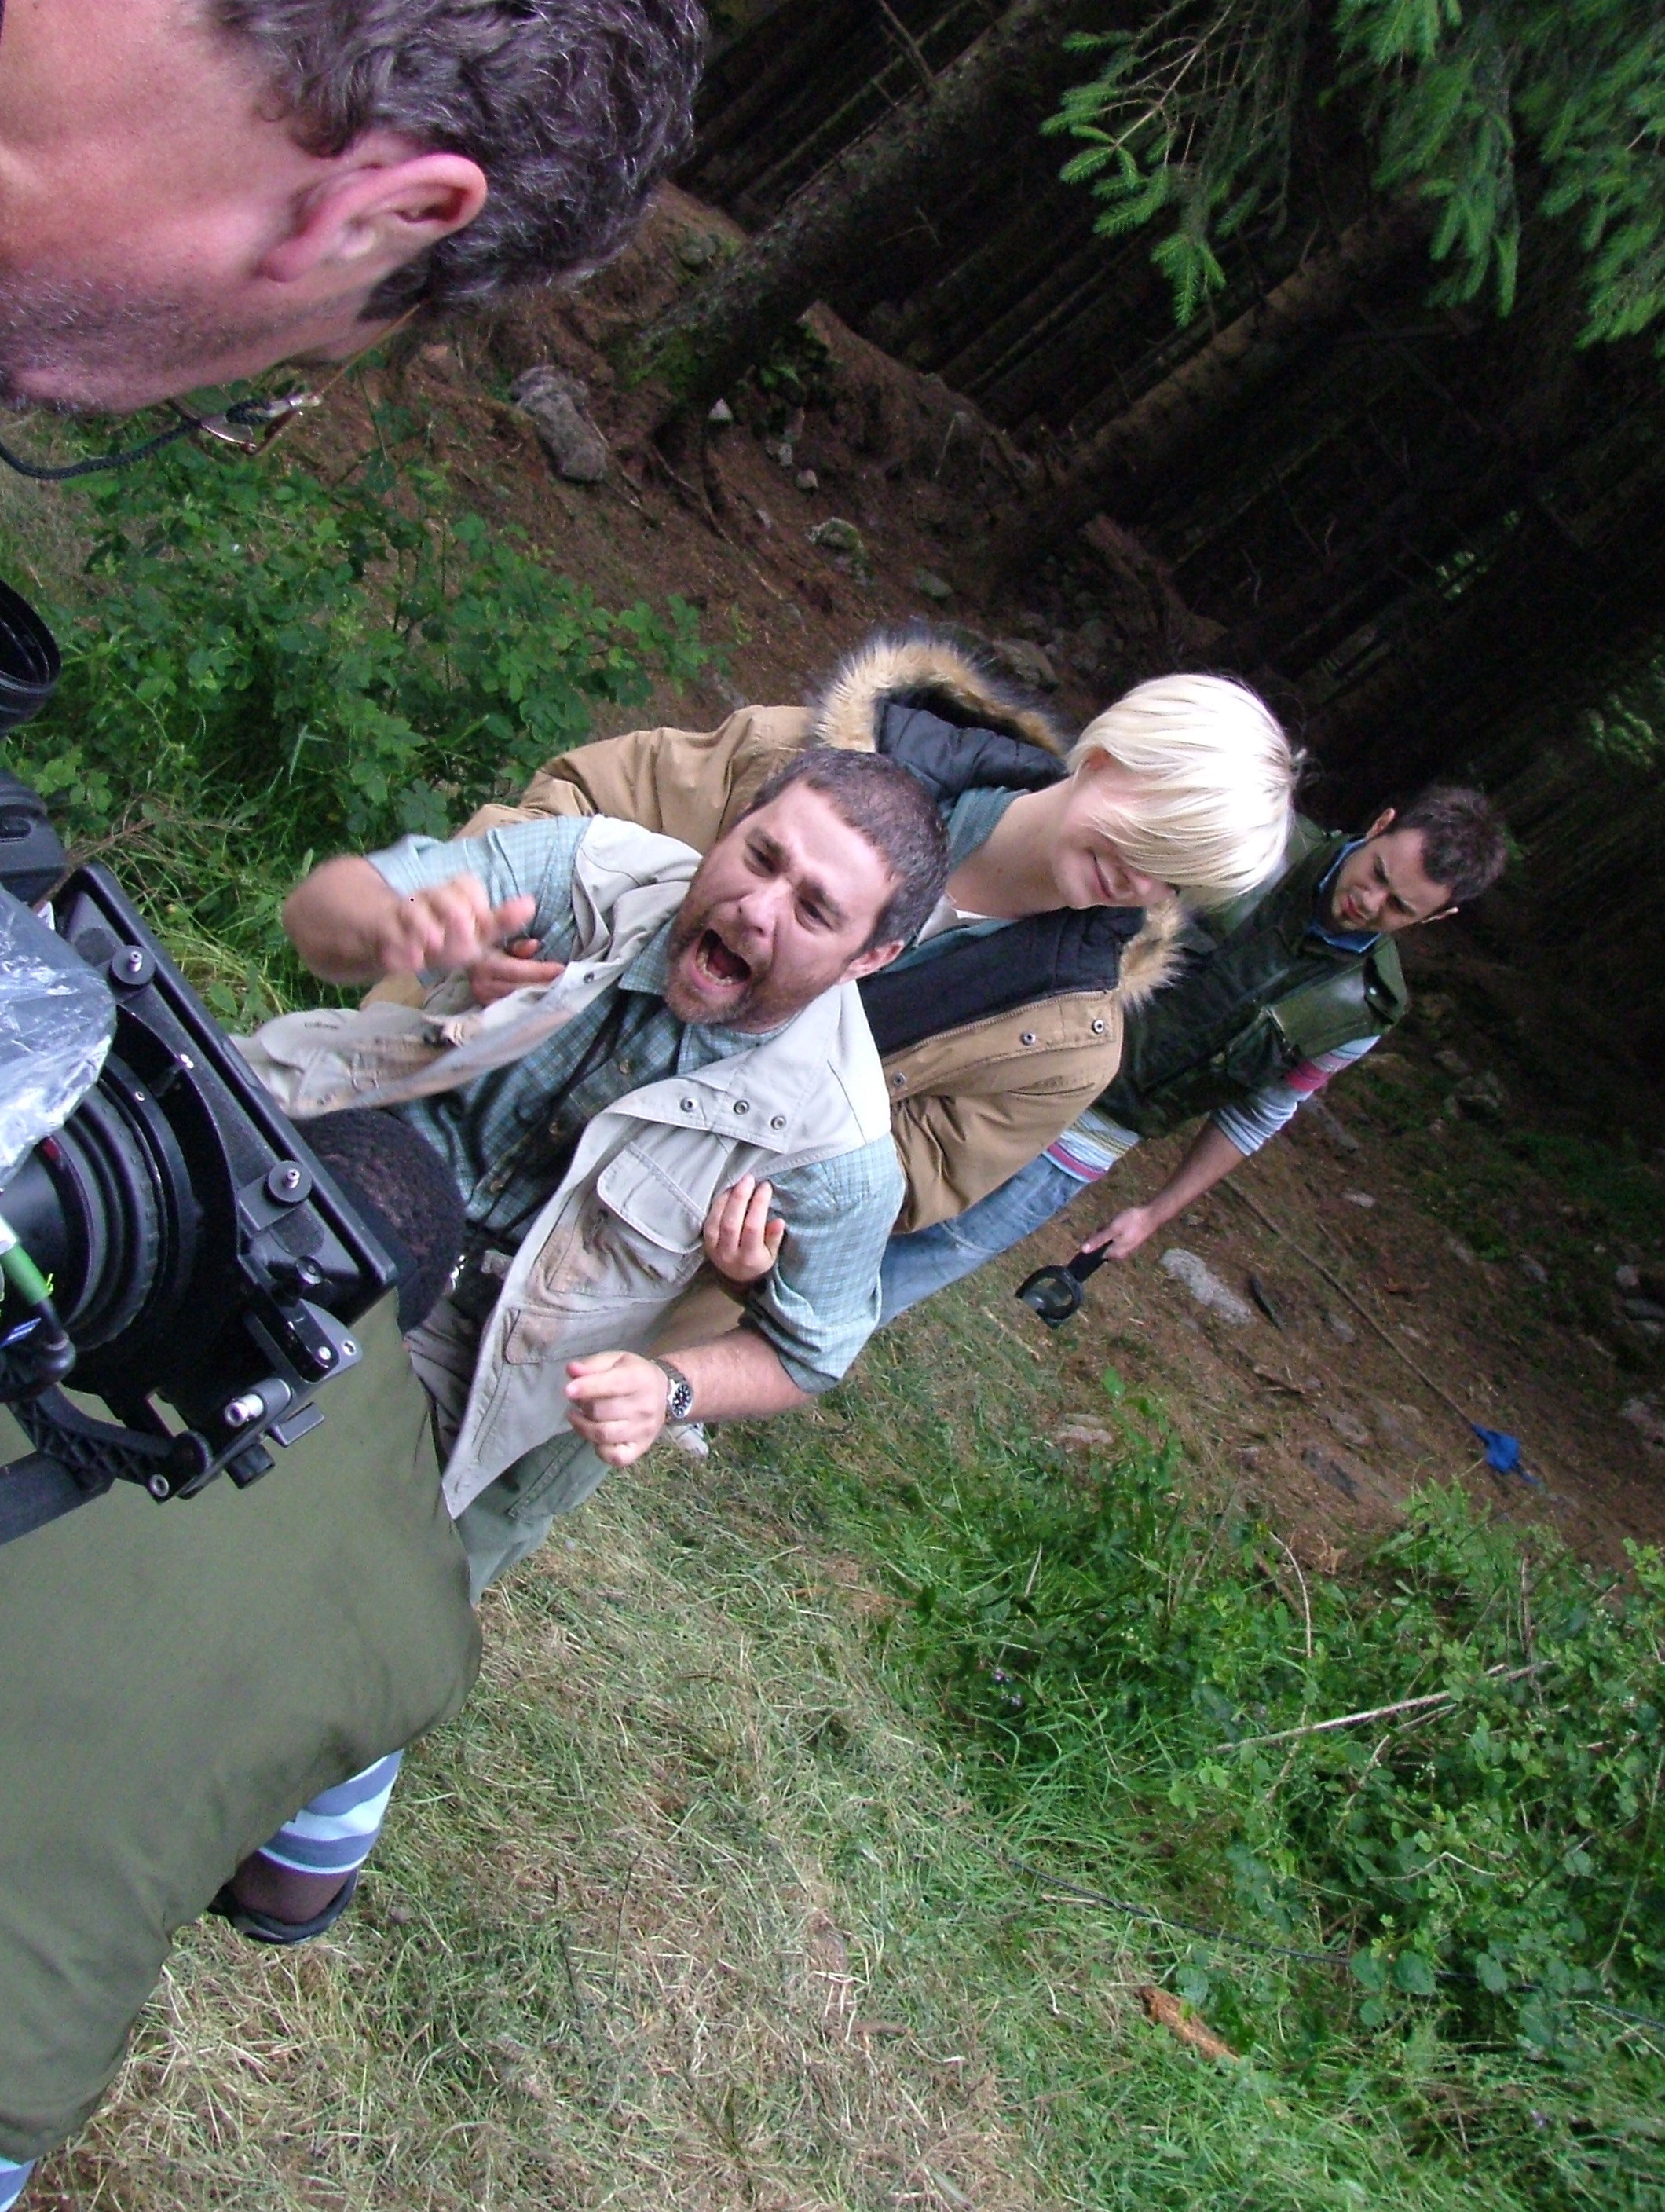 Andy Nyman, Laura Harris & Danny Dyer shooting the 'leg' sequence in 'Severance'